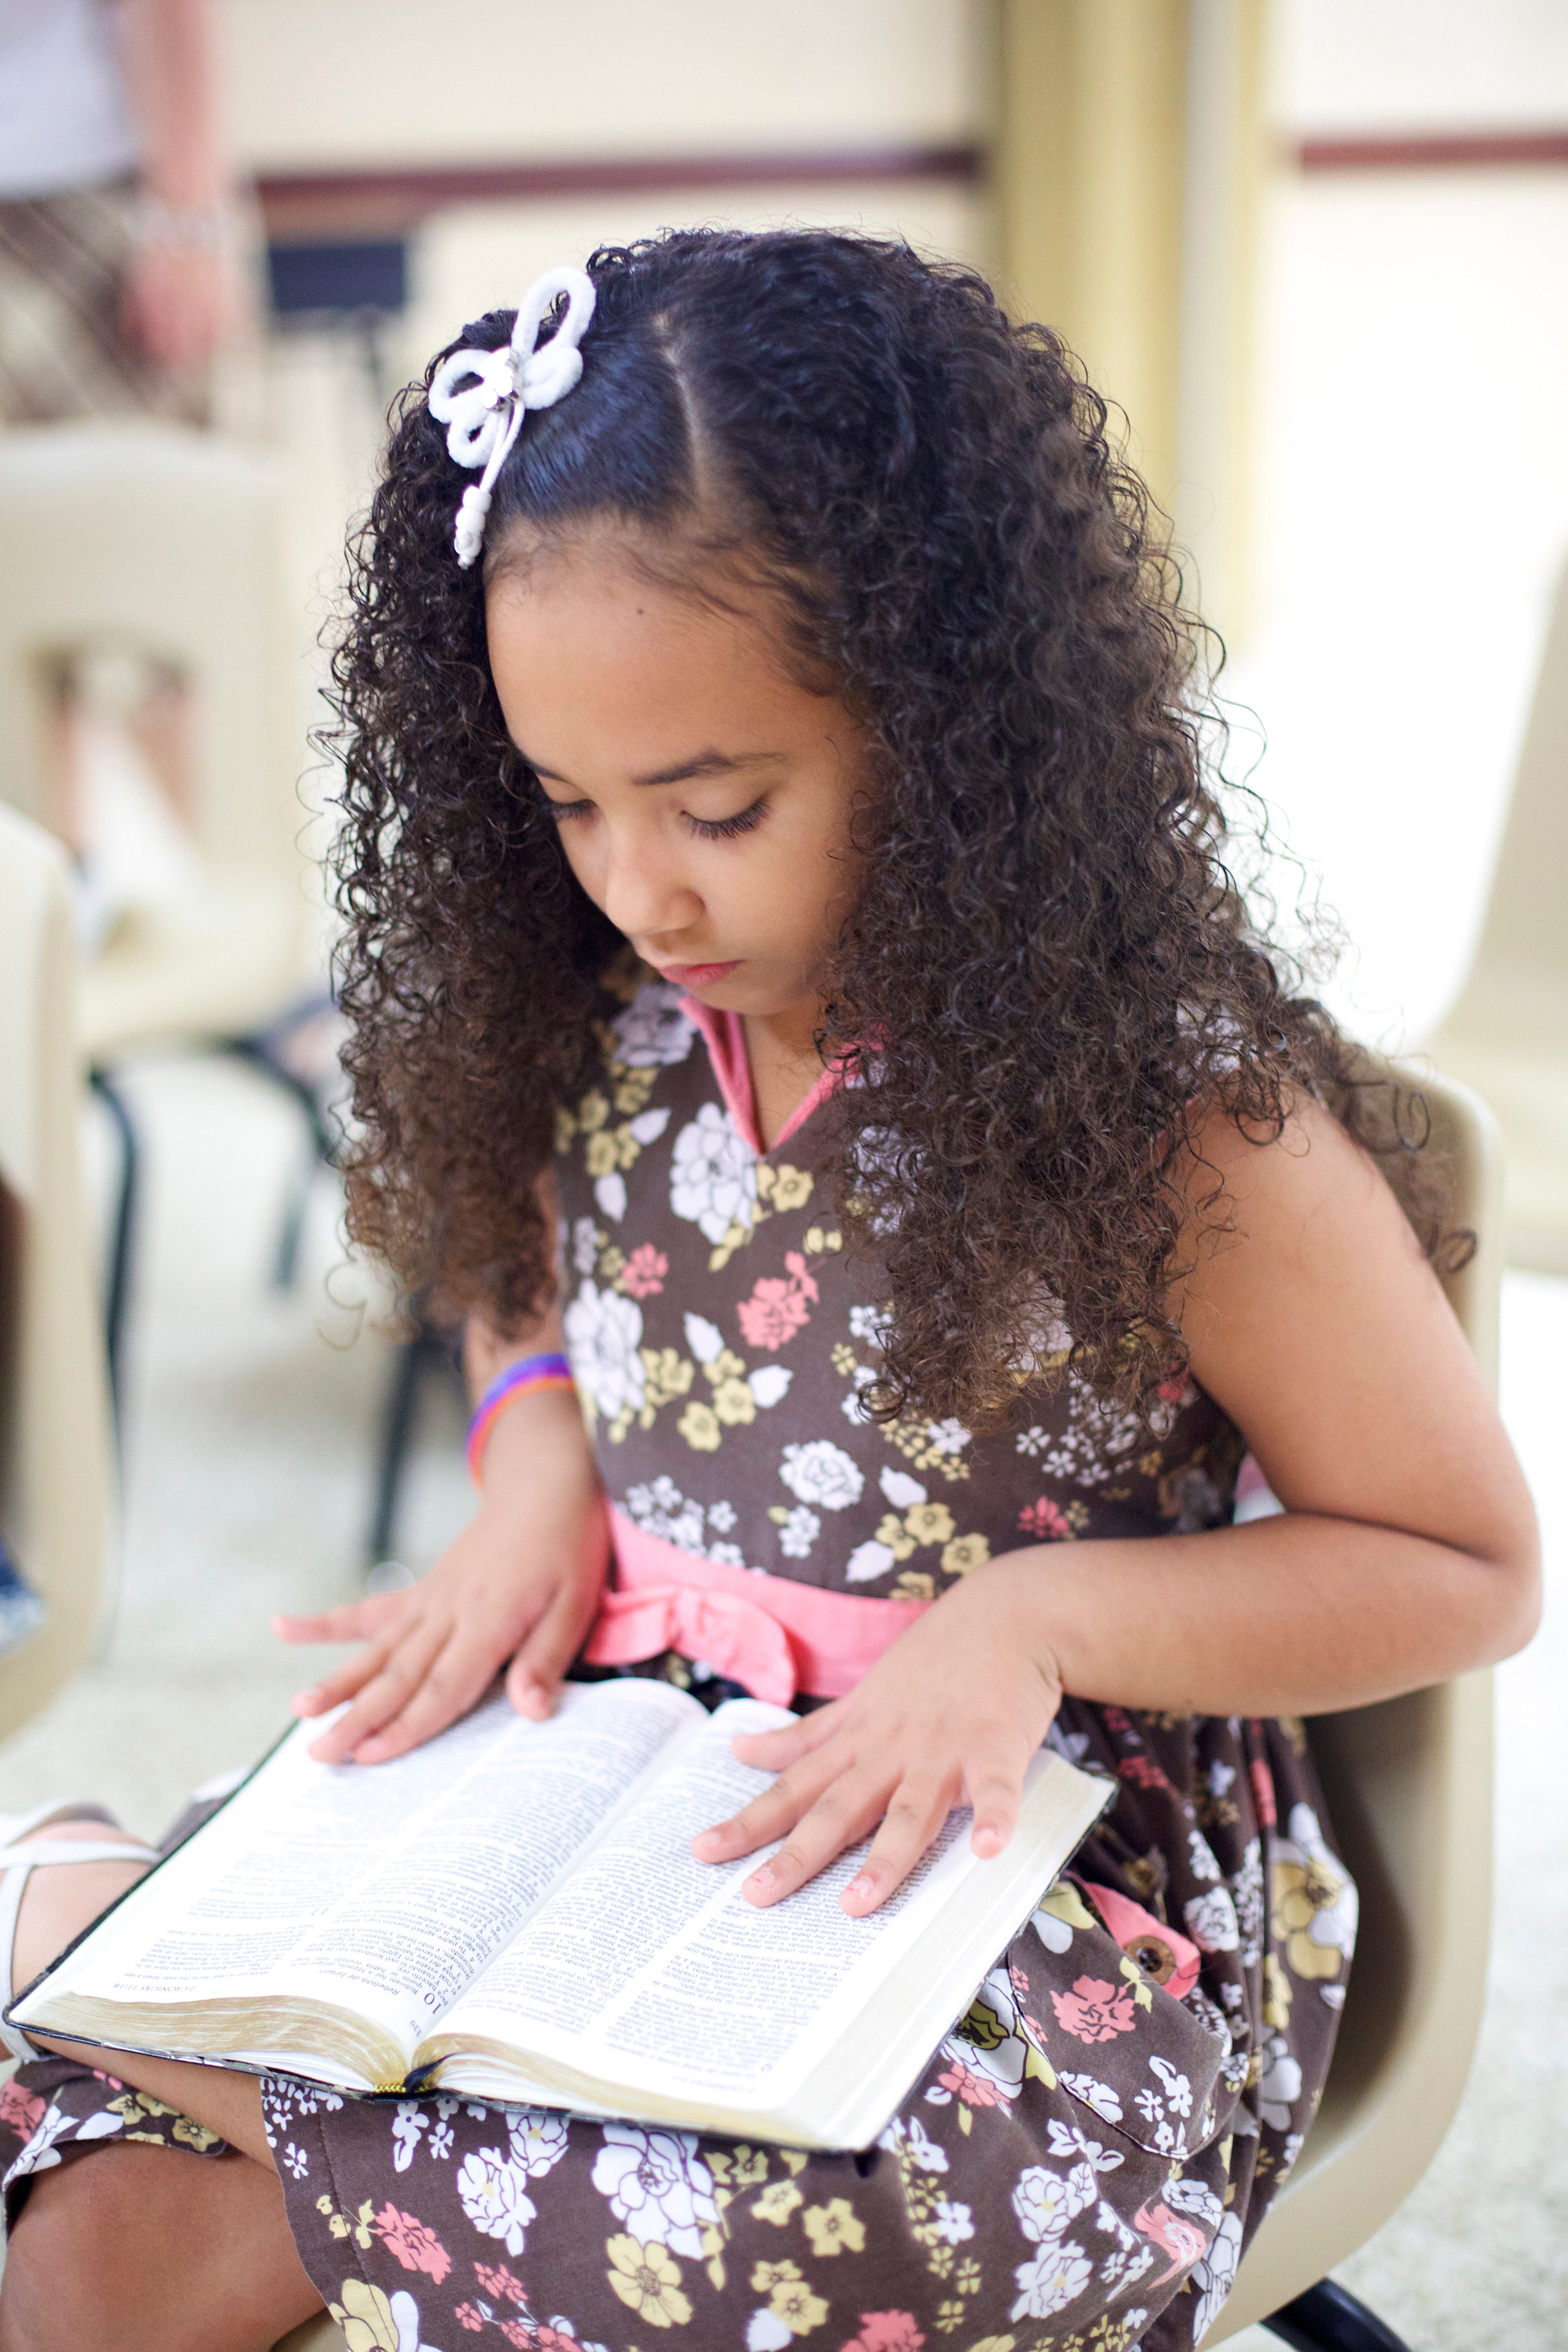 A little girl sits on a chair and reads her scriptures.